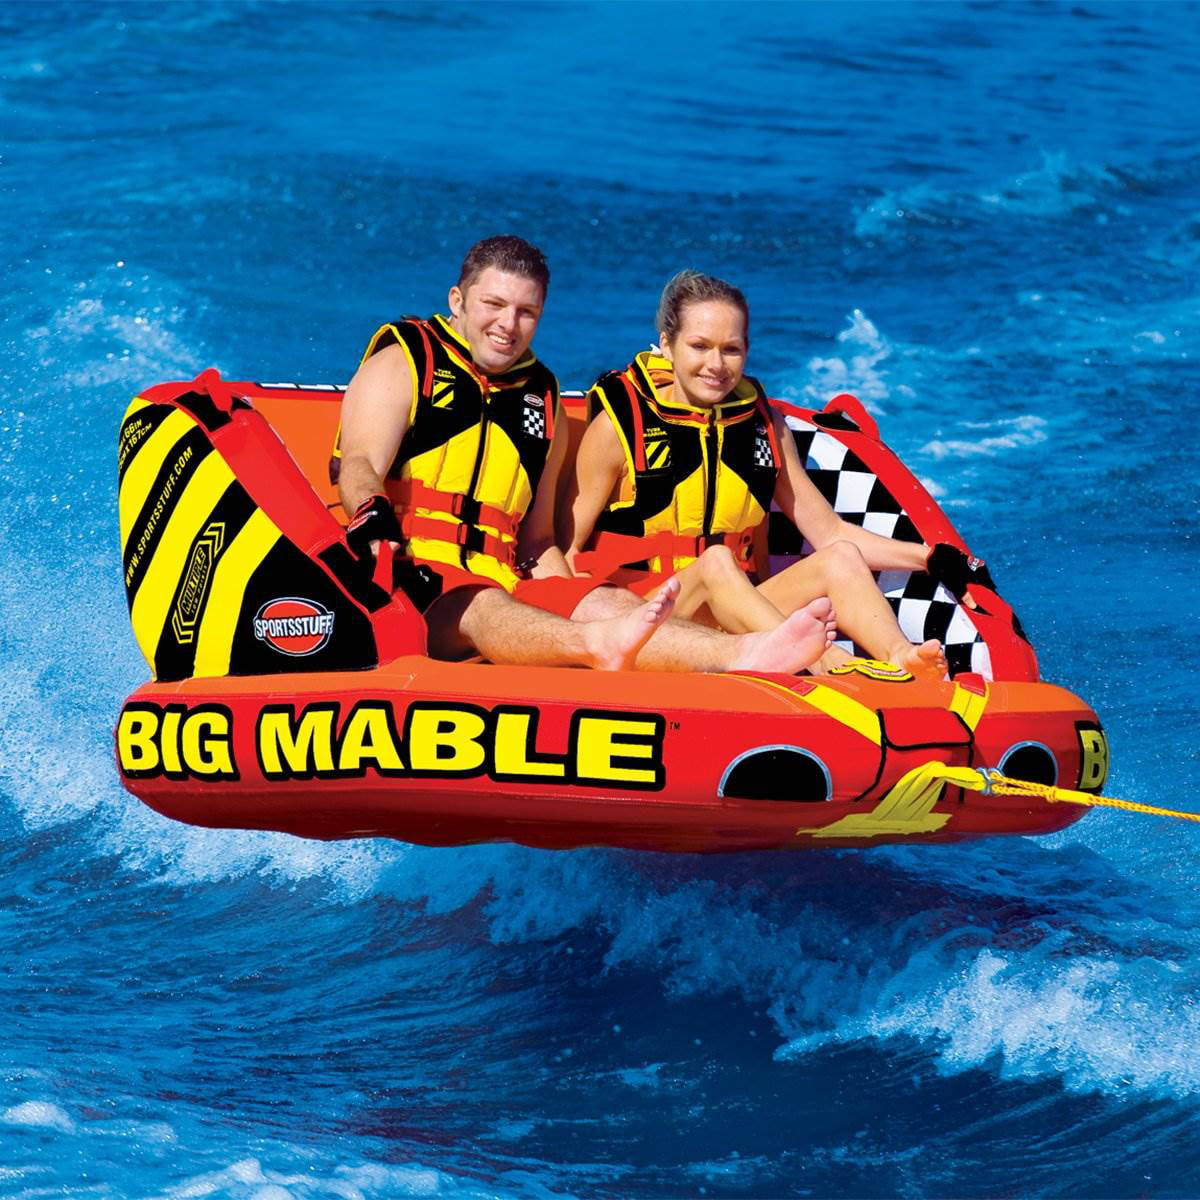 Sportsstuff Inflatable Big Mable Sitting Double Rider Towable Boat and Lake Tube - 2